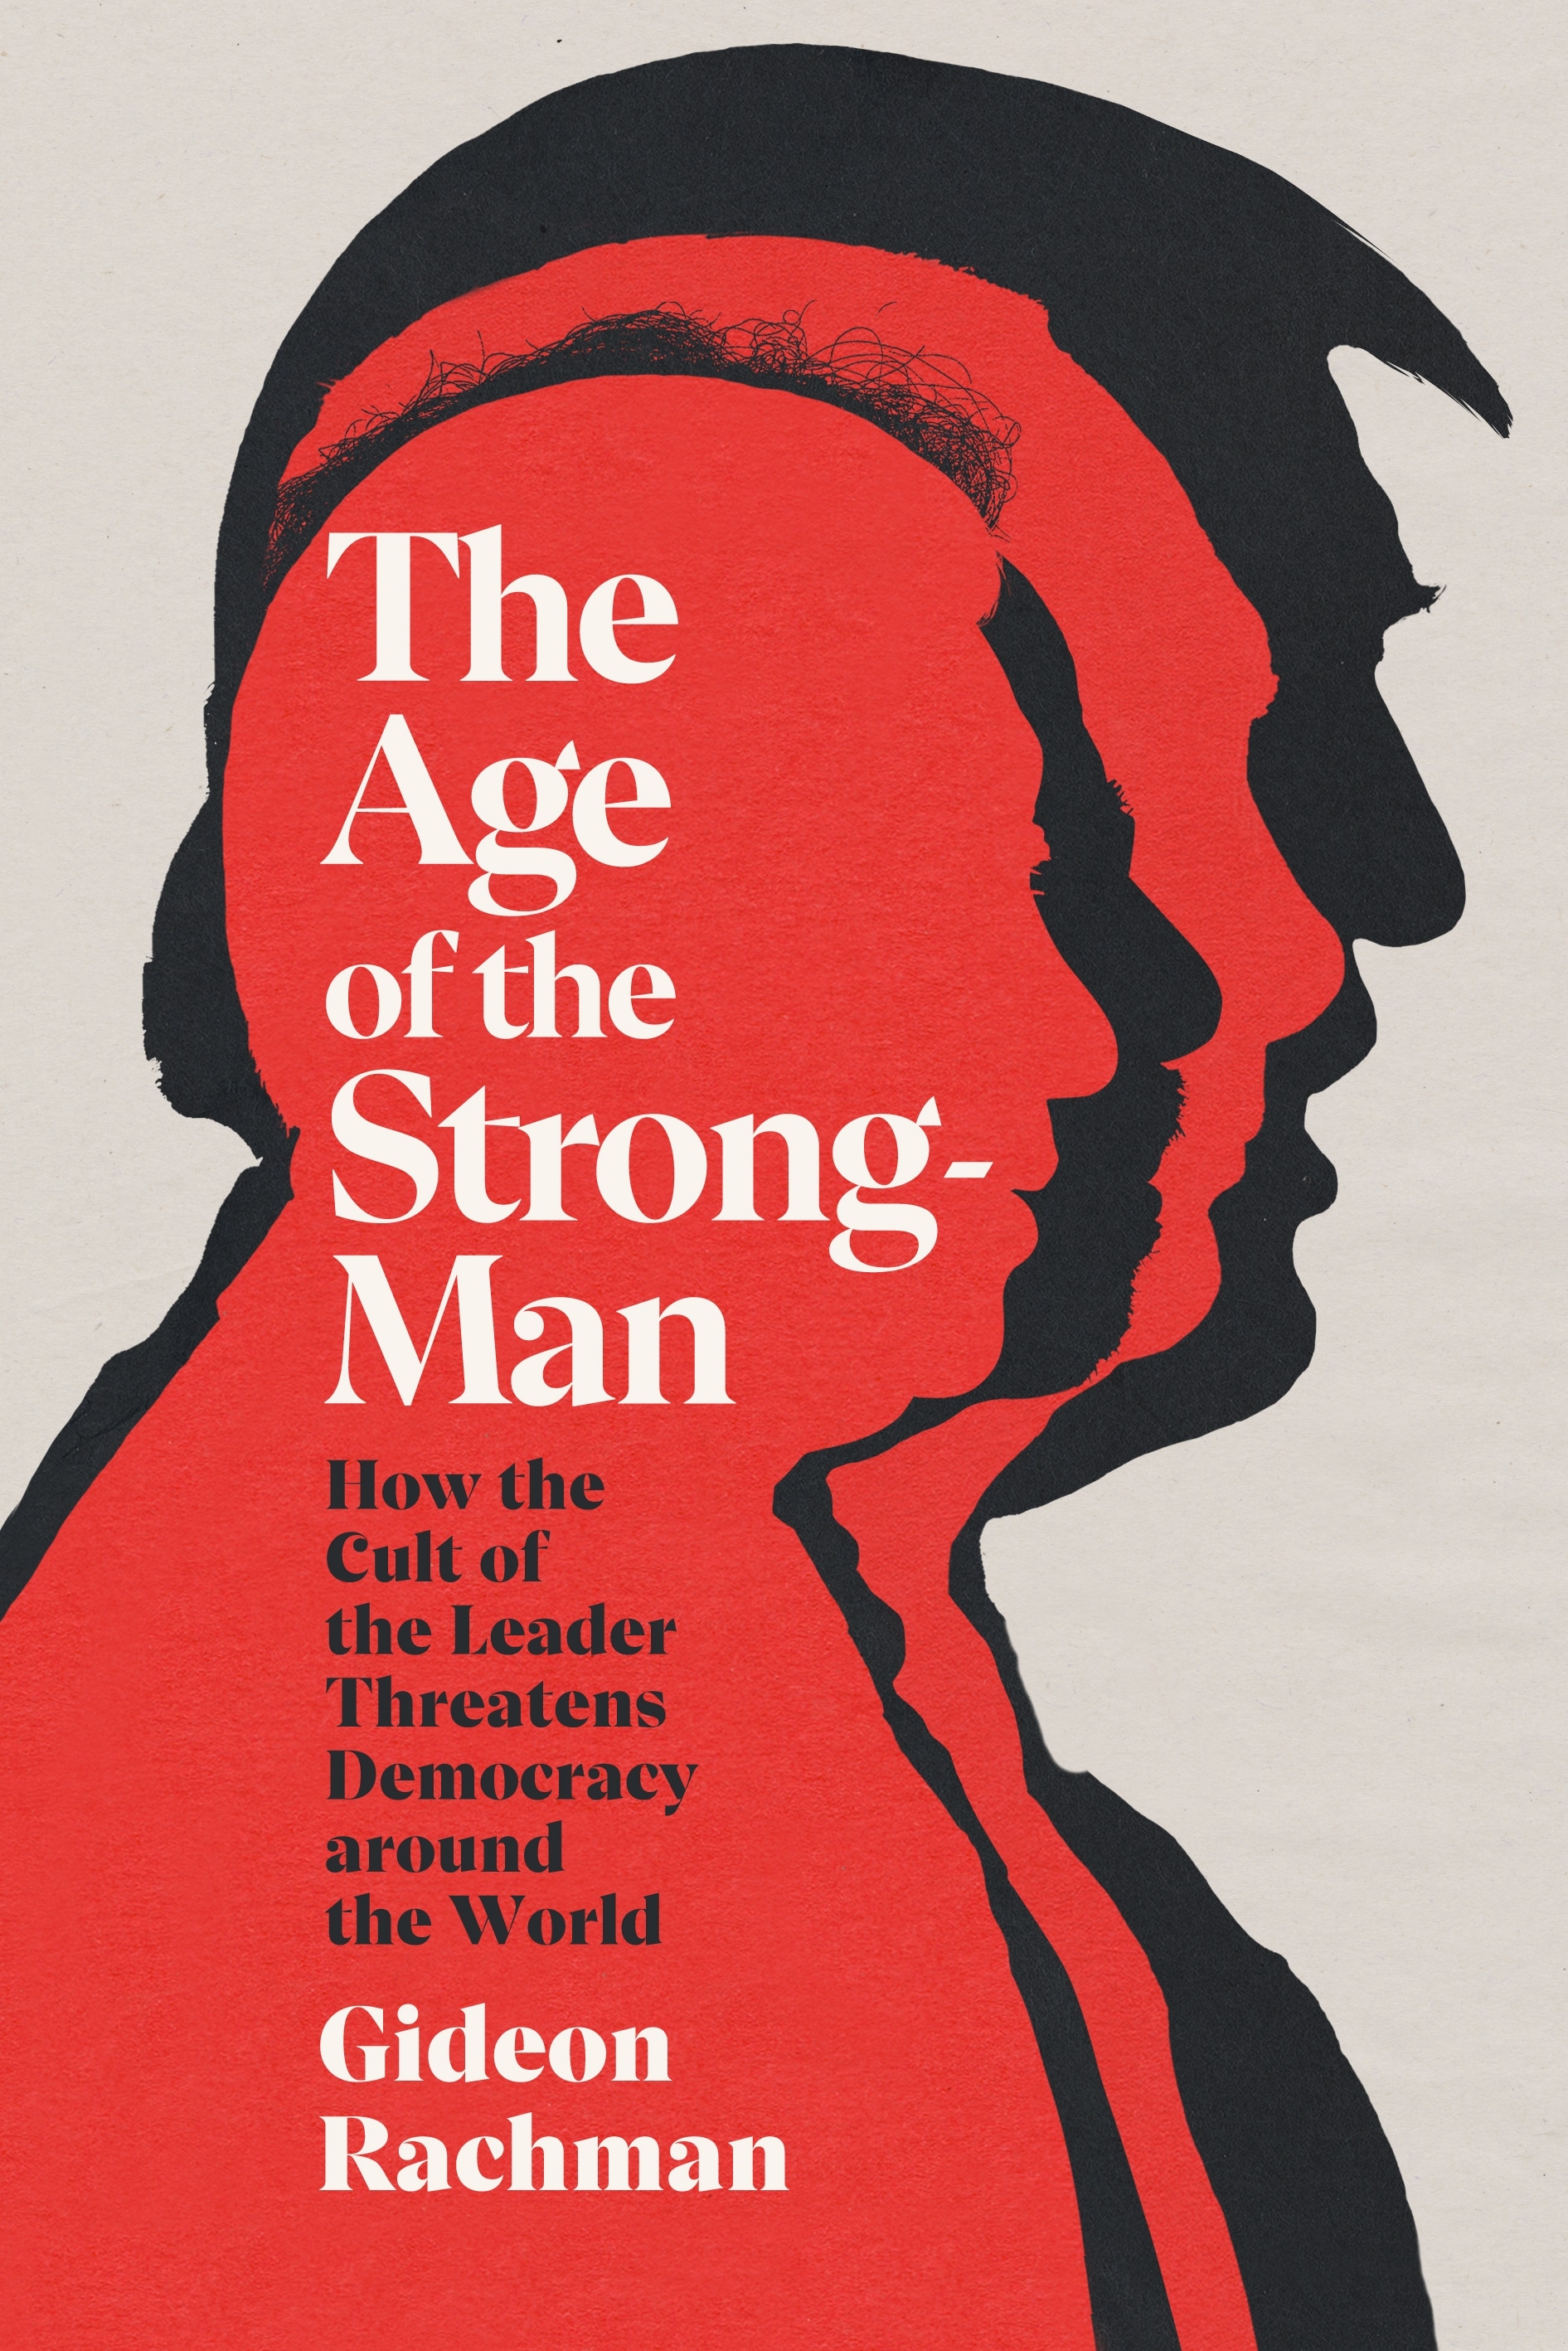 Book “The Age of The Strongman” by Gideon Rachman — April 7, 2022